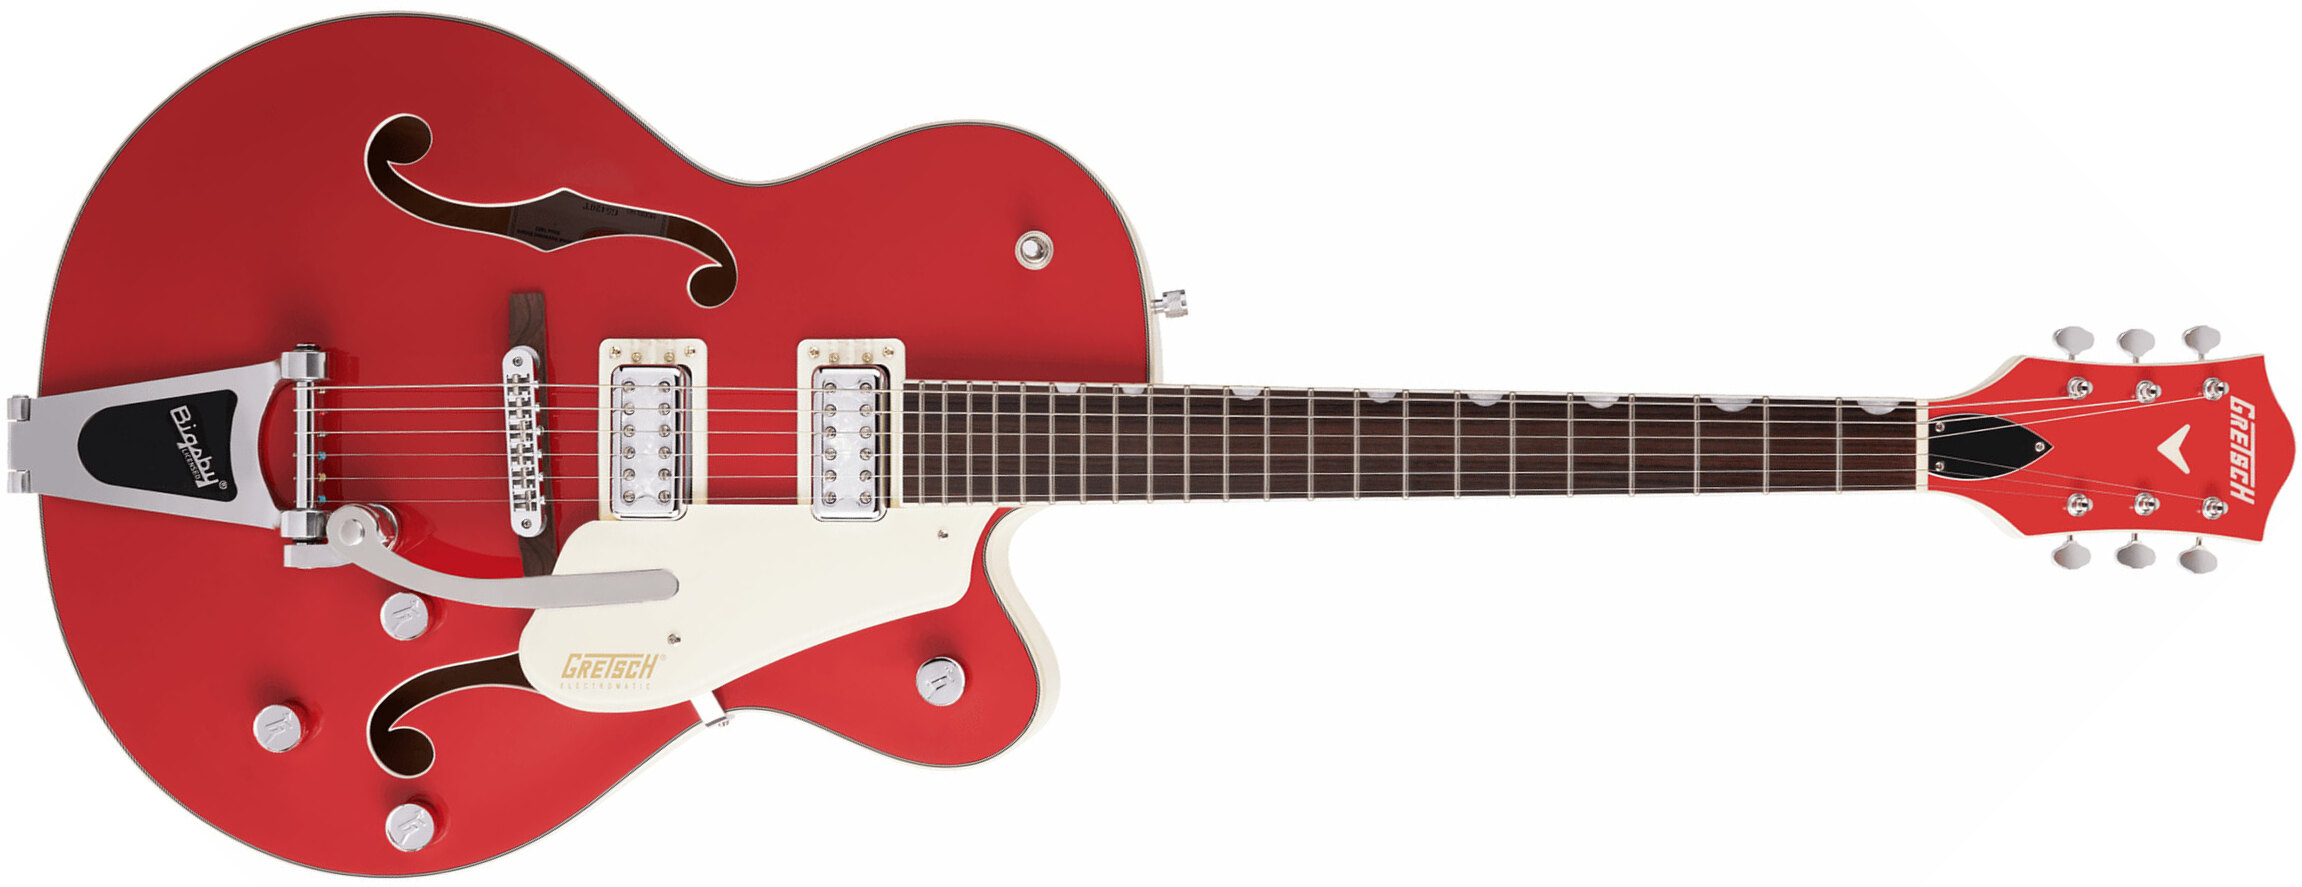 Gretsch G5410t Tri-five Electromatic Hollow Hh Bigsby Rw - 2-tone Fiesta Red On Vintage White - Semi-hollow electric guitar - Main picture